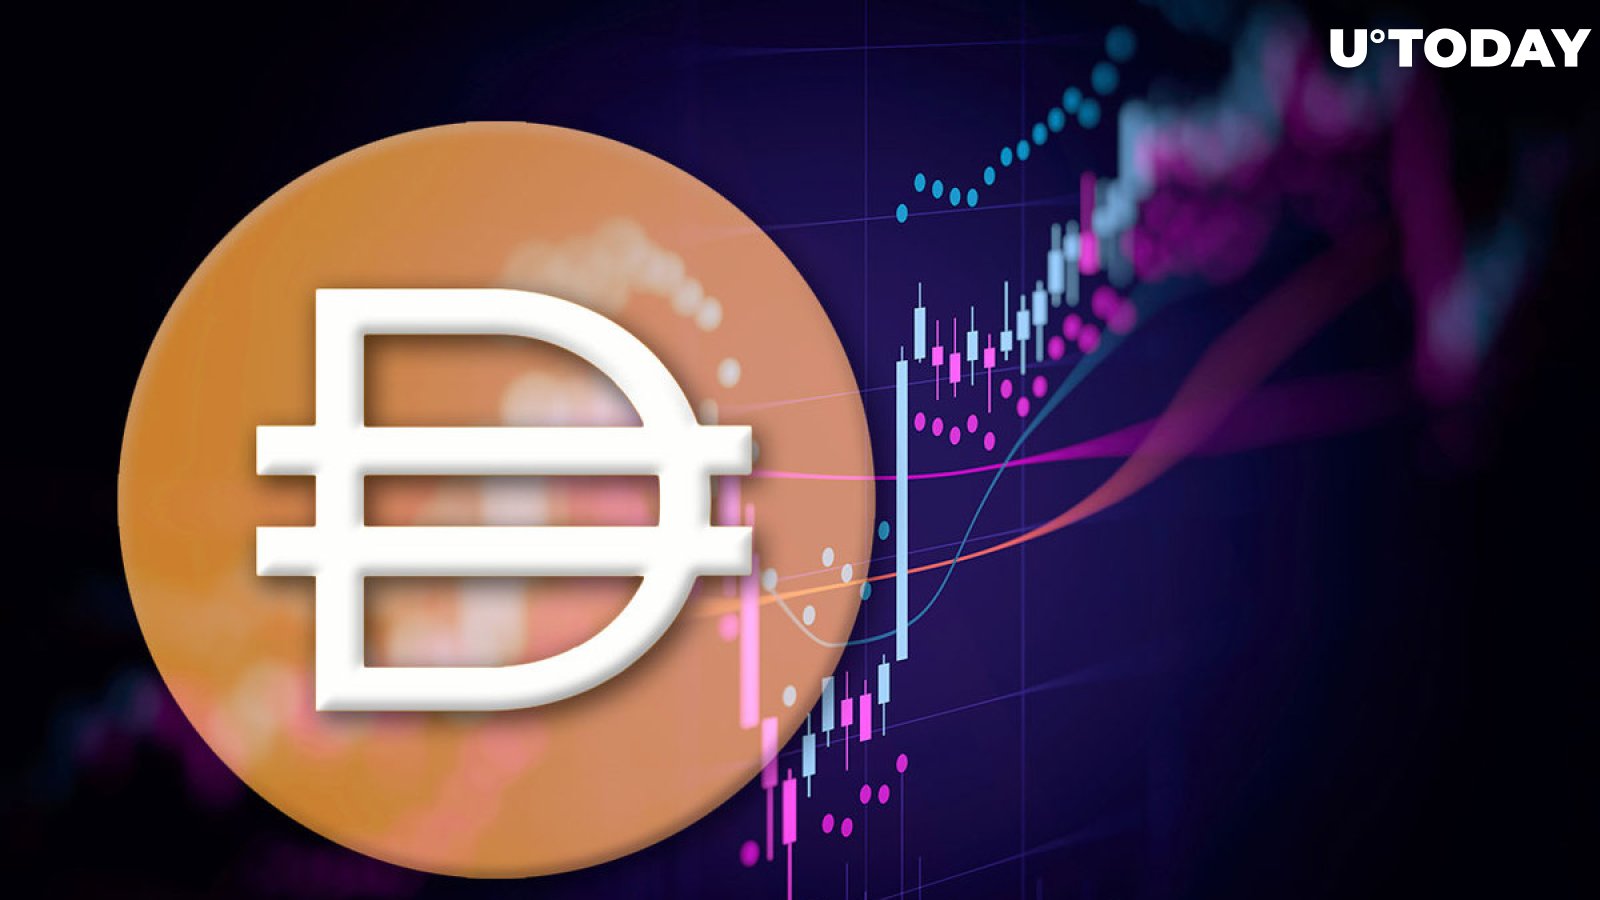 Dogecoin's Market Ranking Now Being Challenged by Stablecoin DAI